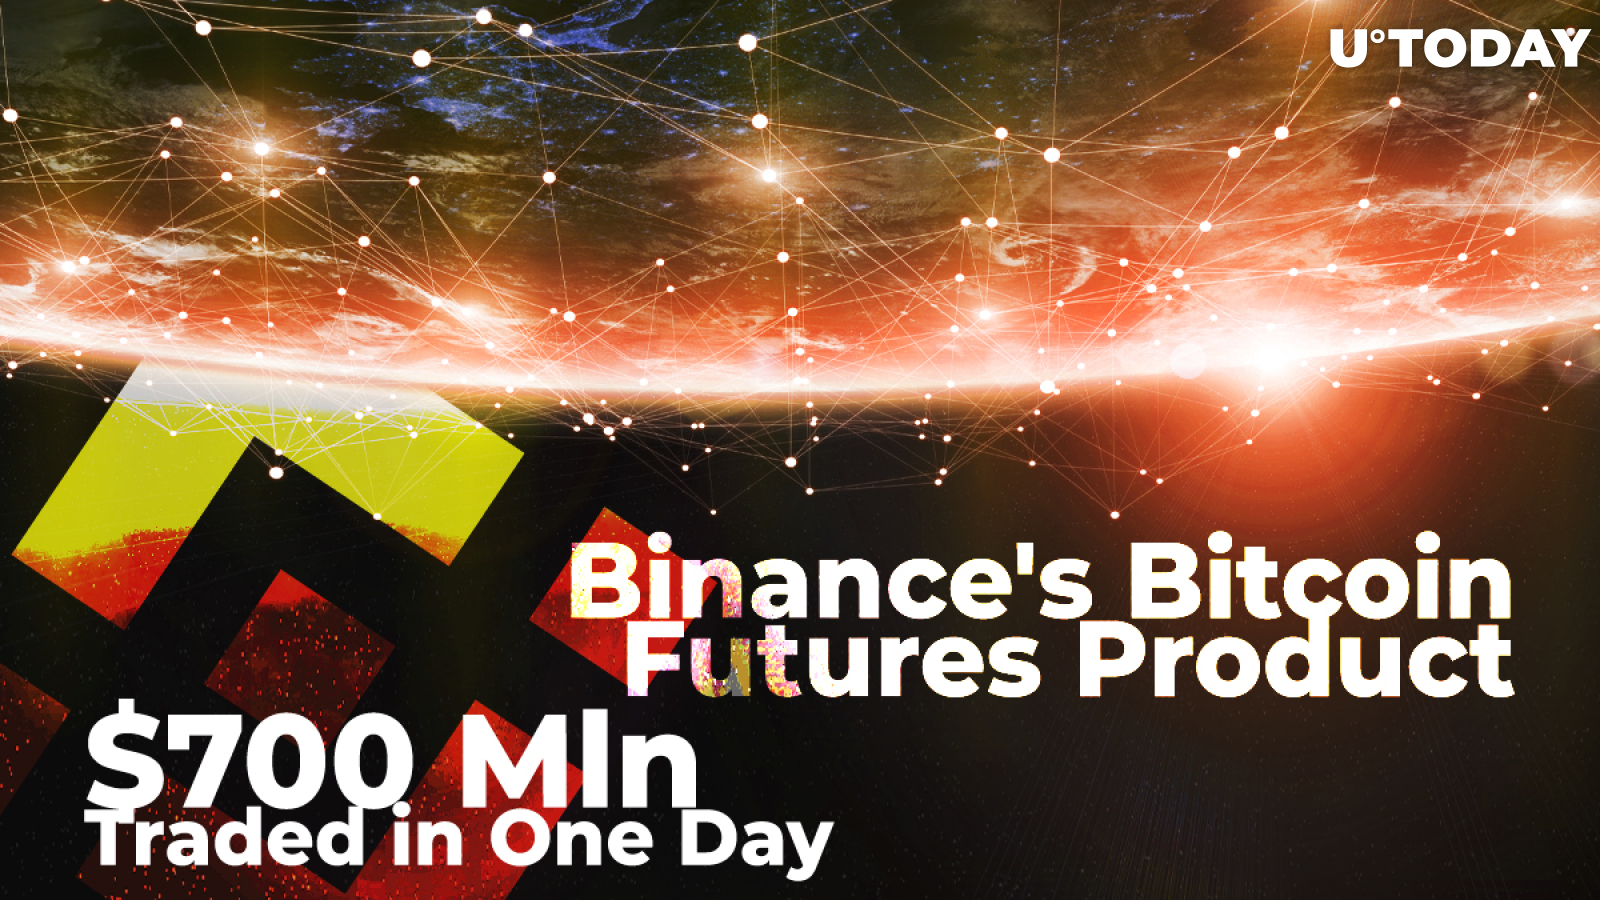 New Record: $700 000 000 Traded on Binance's Bitcoin Futures Platforms in One Day